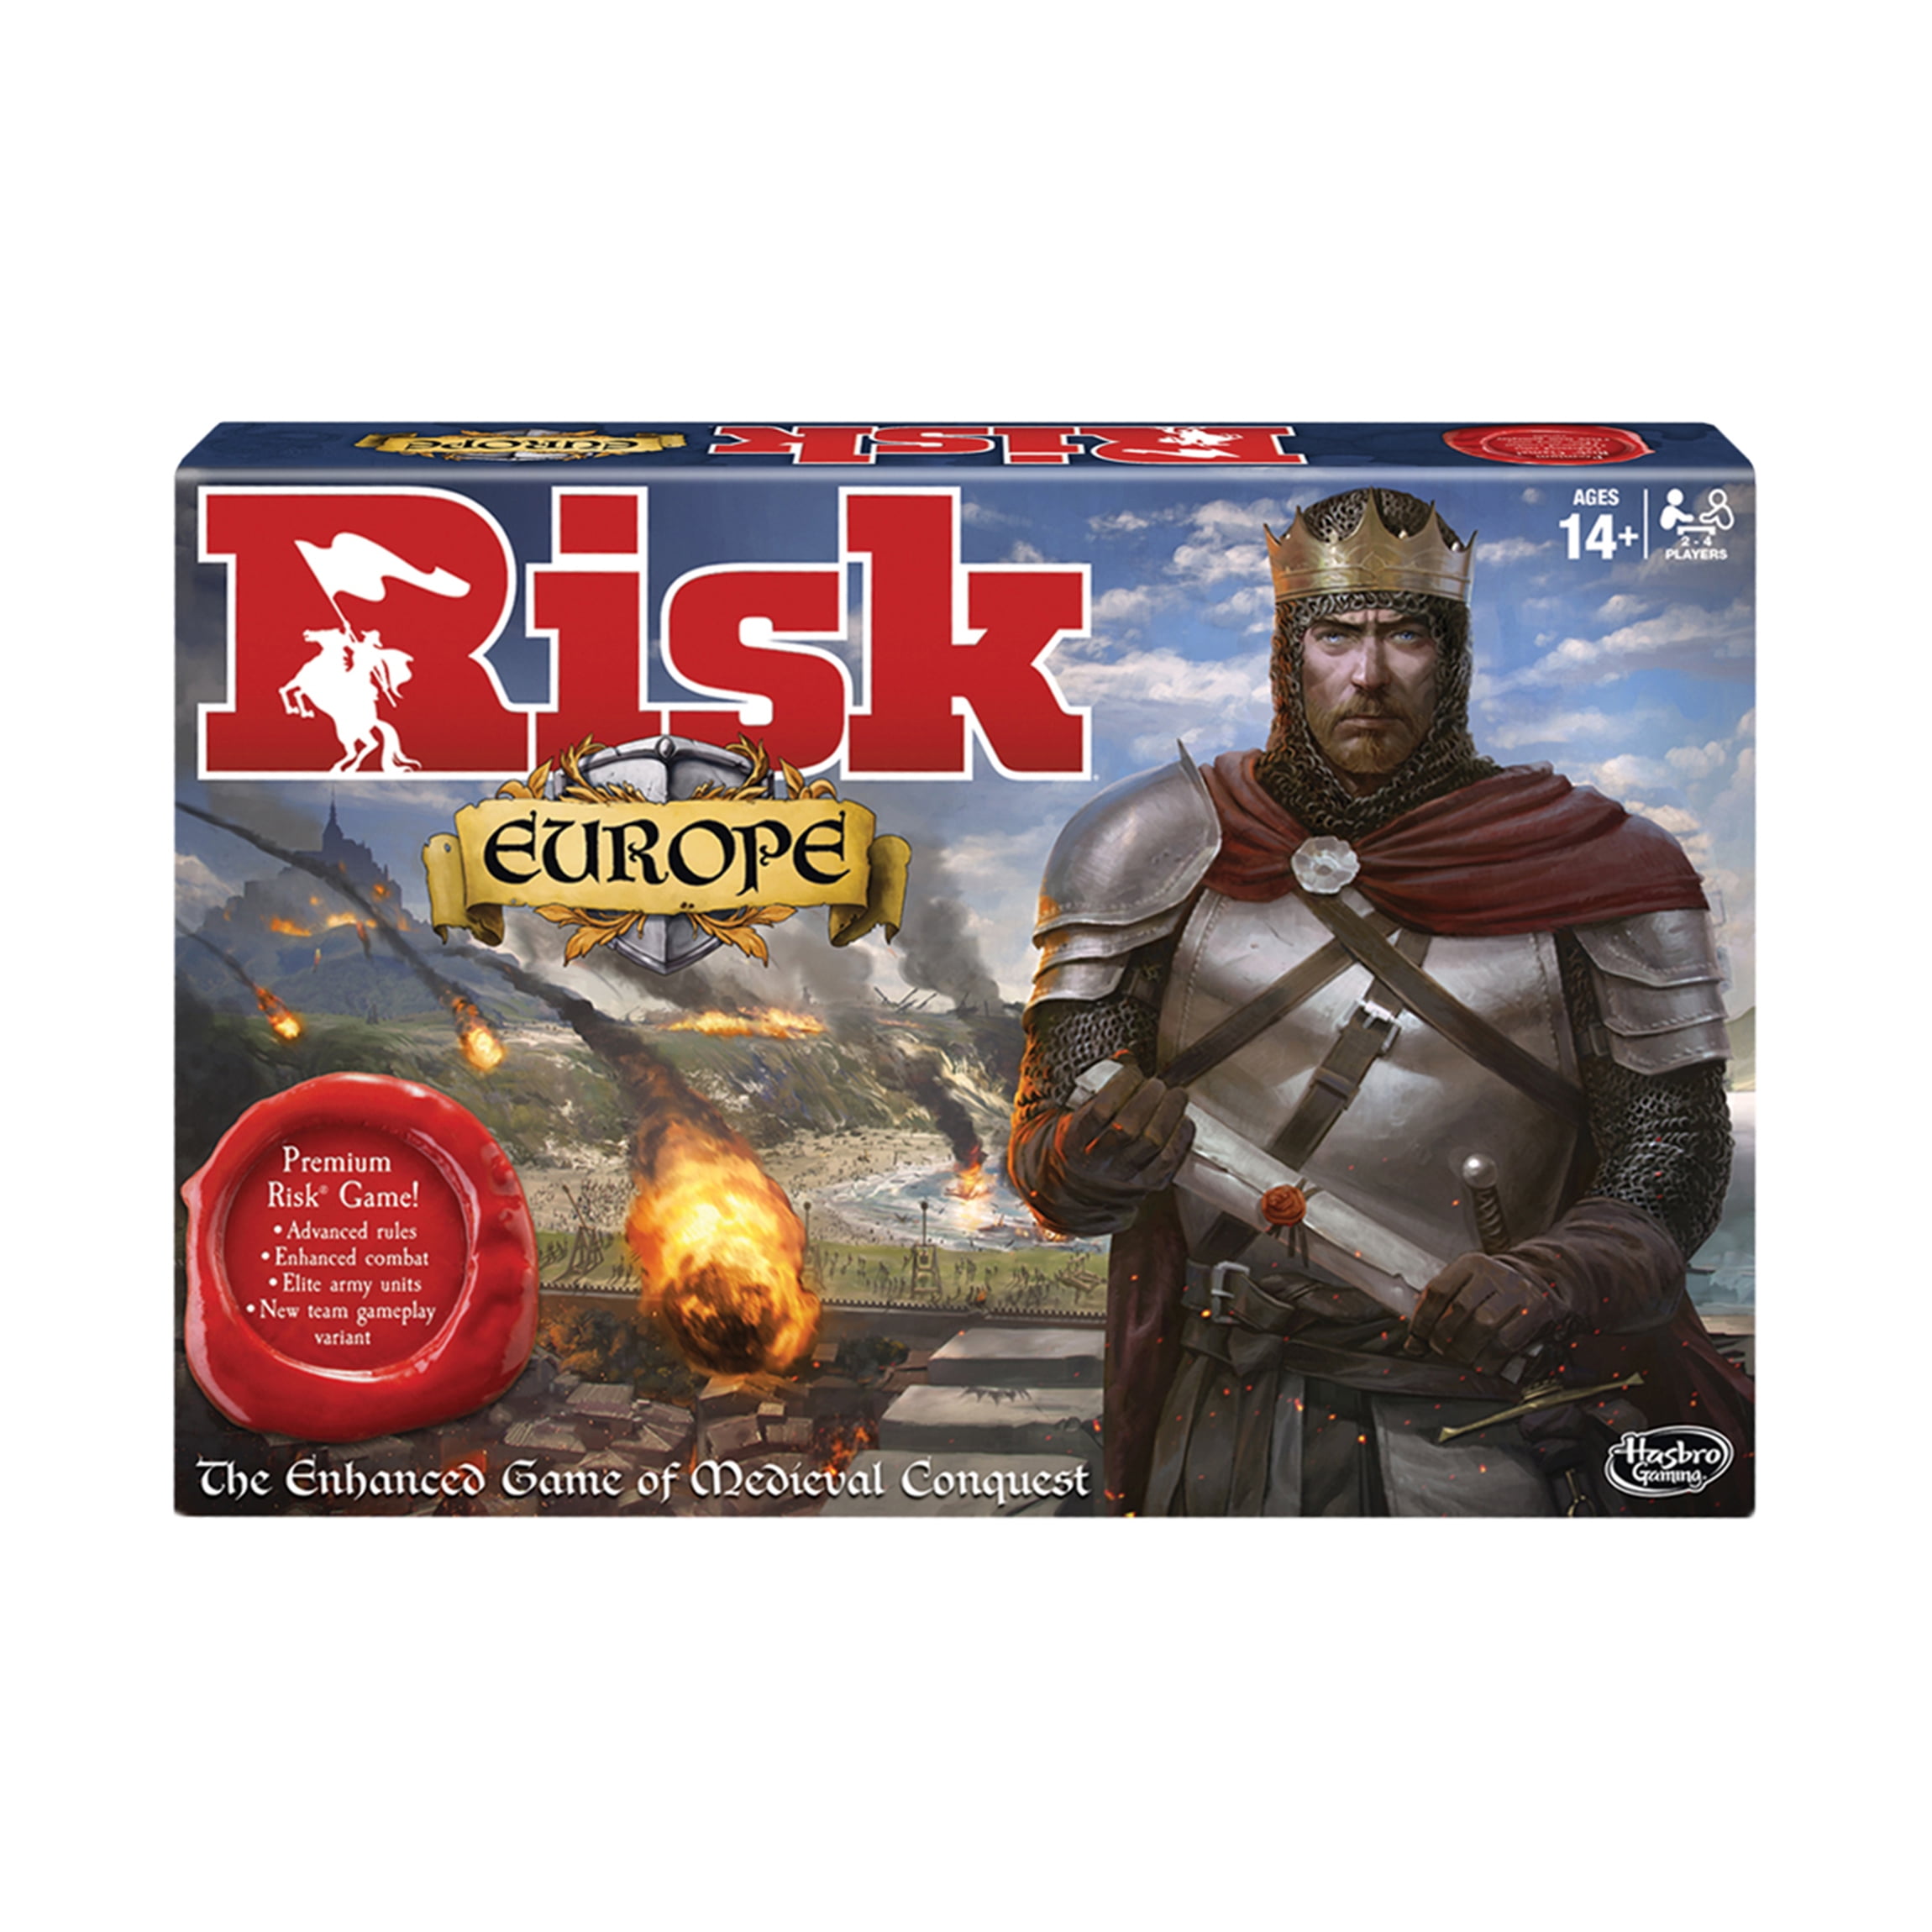 Hasbro Risk Office Politics Board Game A Parody of the Classic Adult Party Game